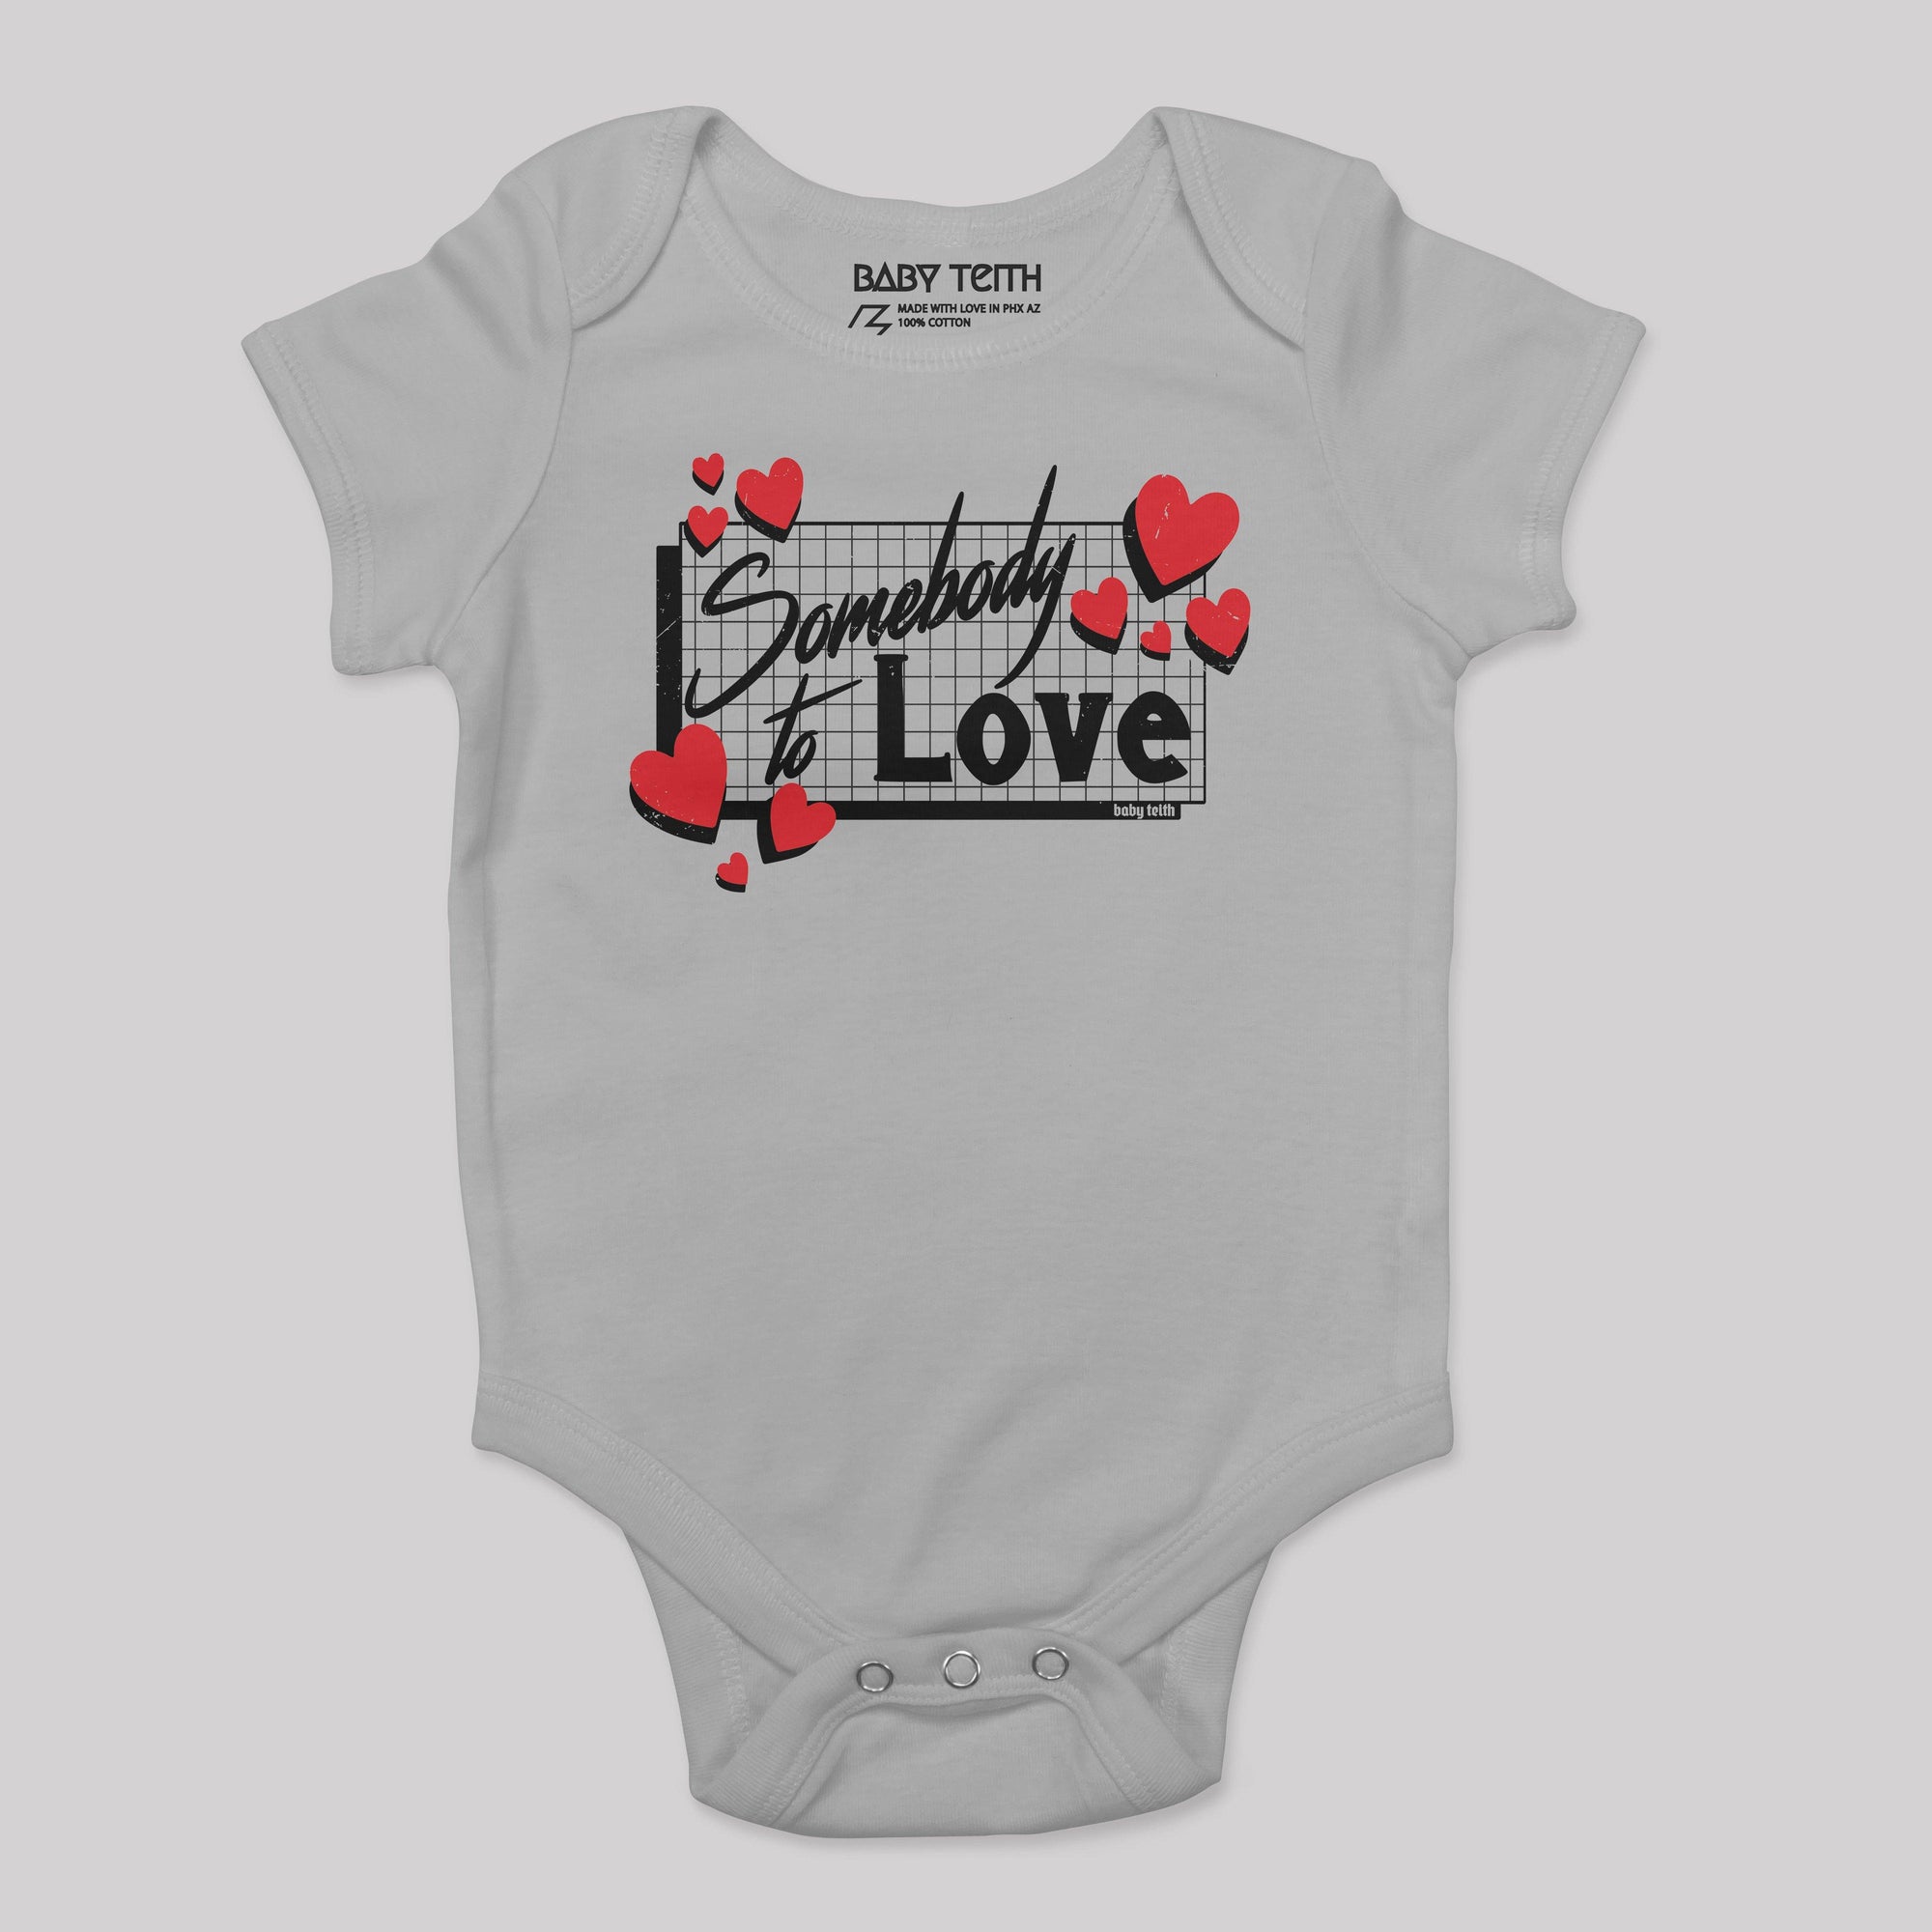 &quot;Somebody to Love&quot; 80&#39;s Bodysuit for Babies - Baby Teith